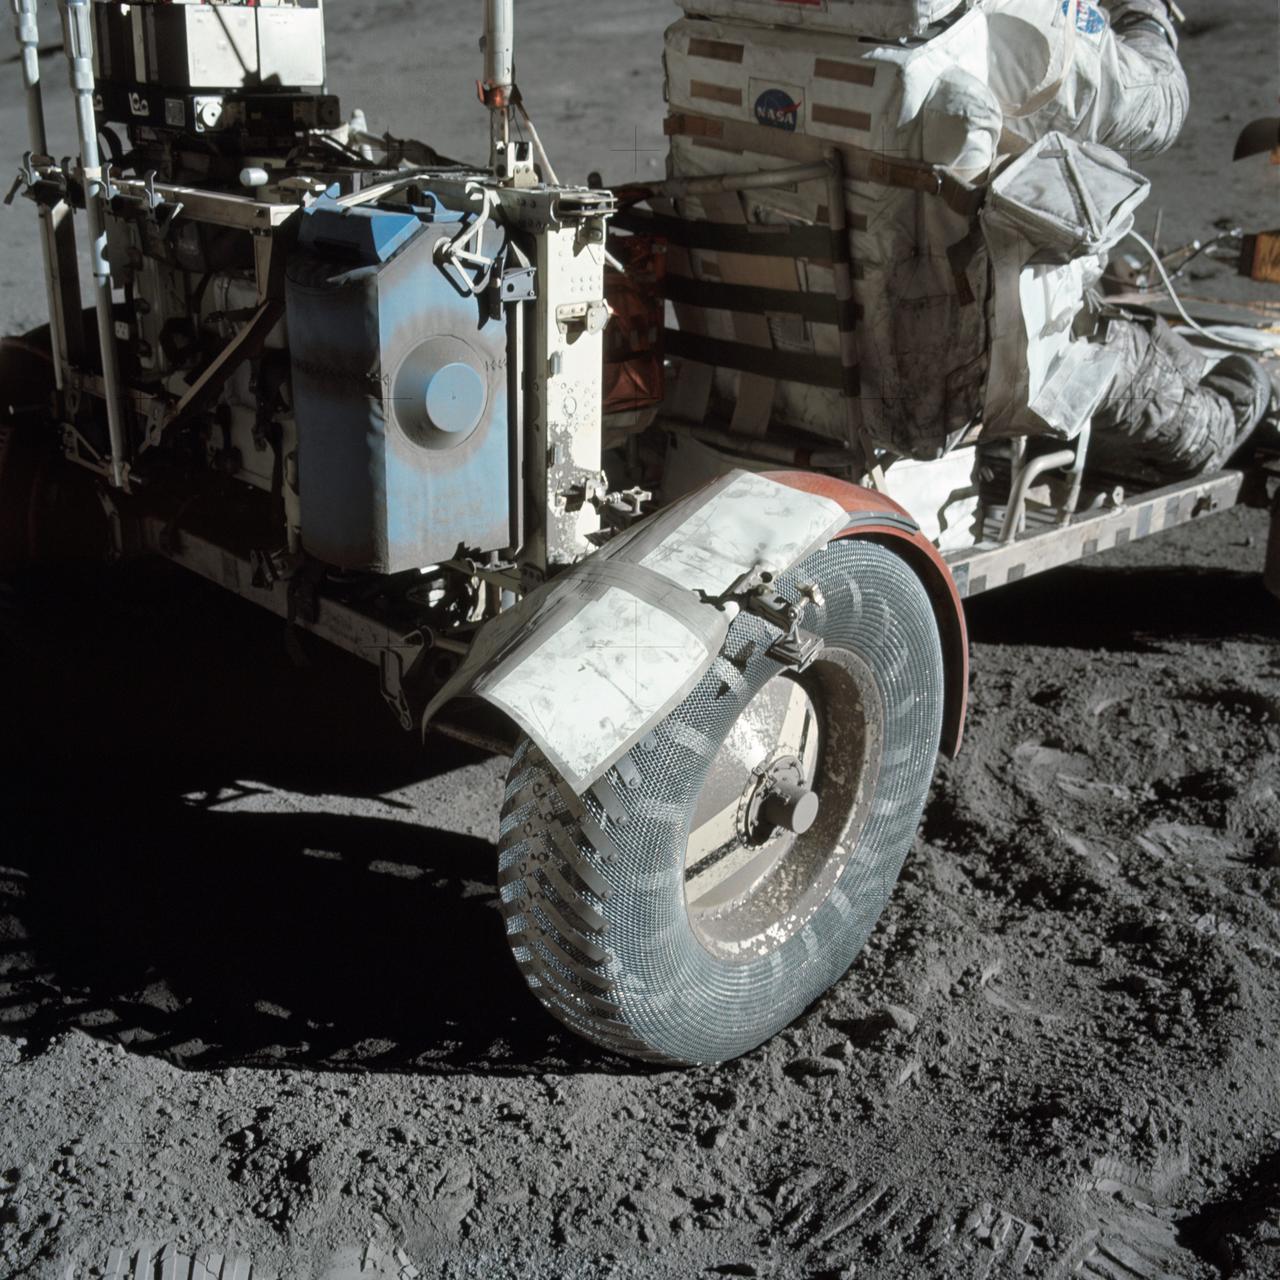 A close-up view of the rear right wheel of the Lunar Roving Vehicle (LRV) at the Taurus-Littrow. Note the makeshift repair arrangement on the fender of the LRV; a folded map is held in place parallel to the wheel with several strips of gray duct tape. Below the wheel, sunlight casts stark shadows on the dusty lunar surface. Credit: NASA